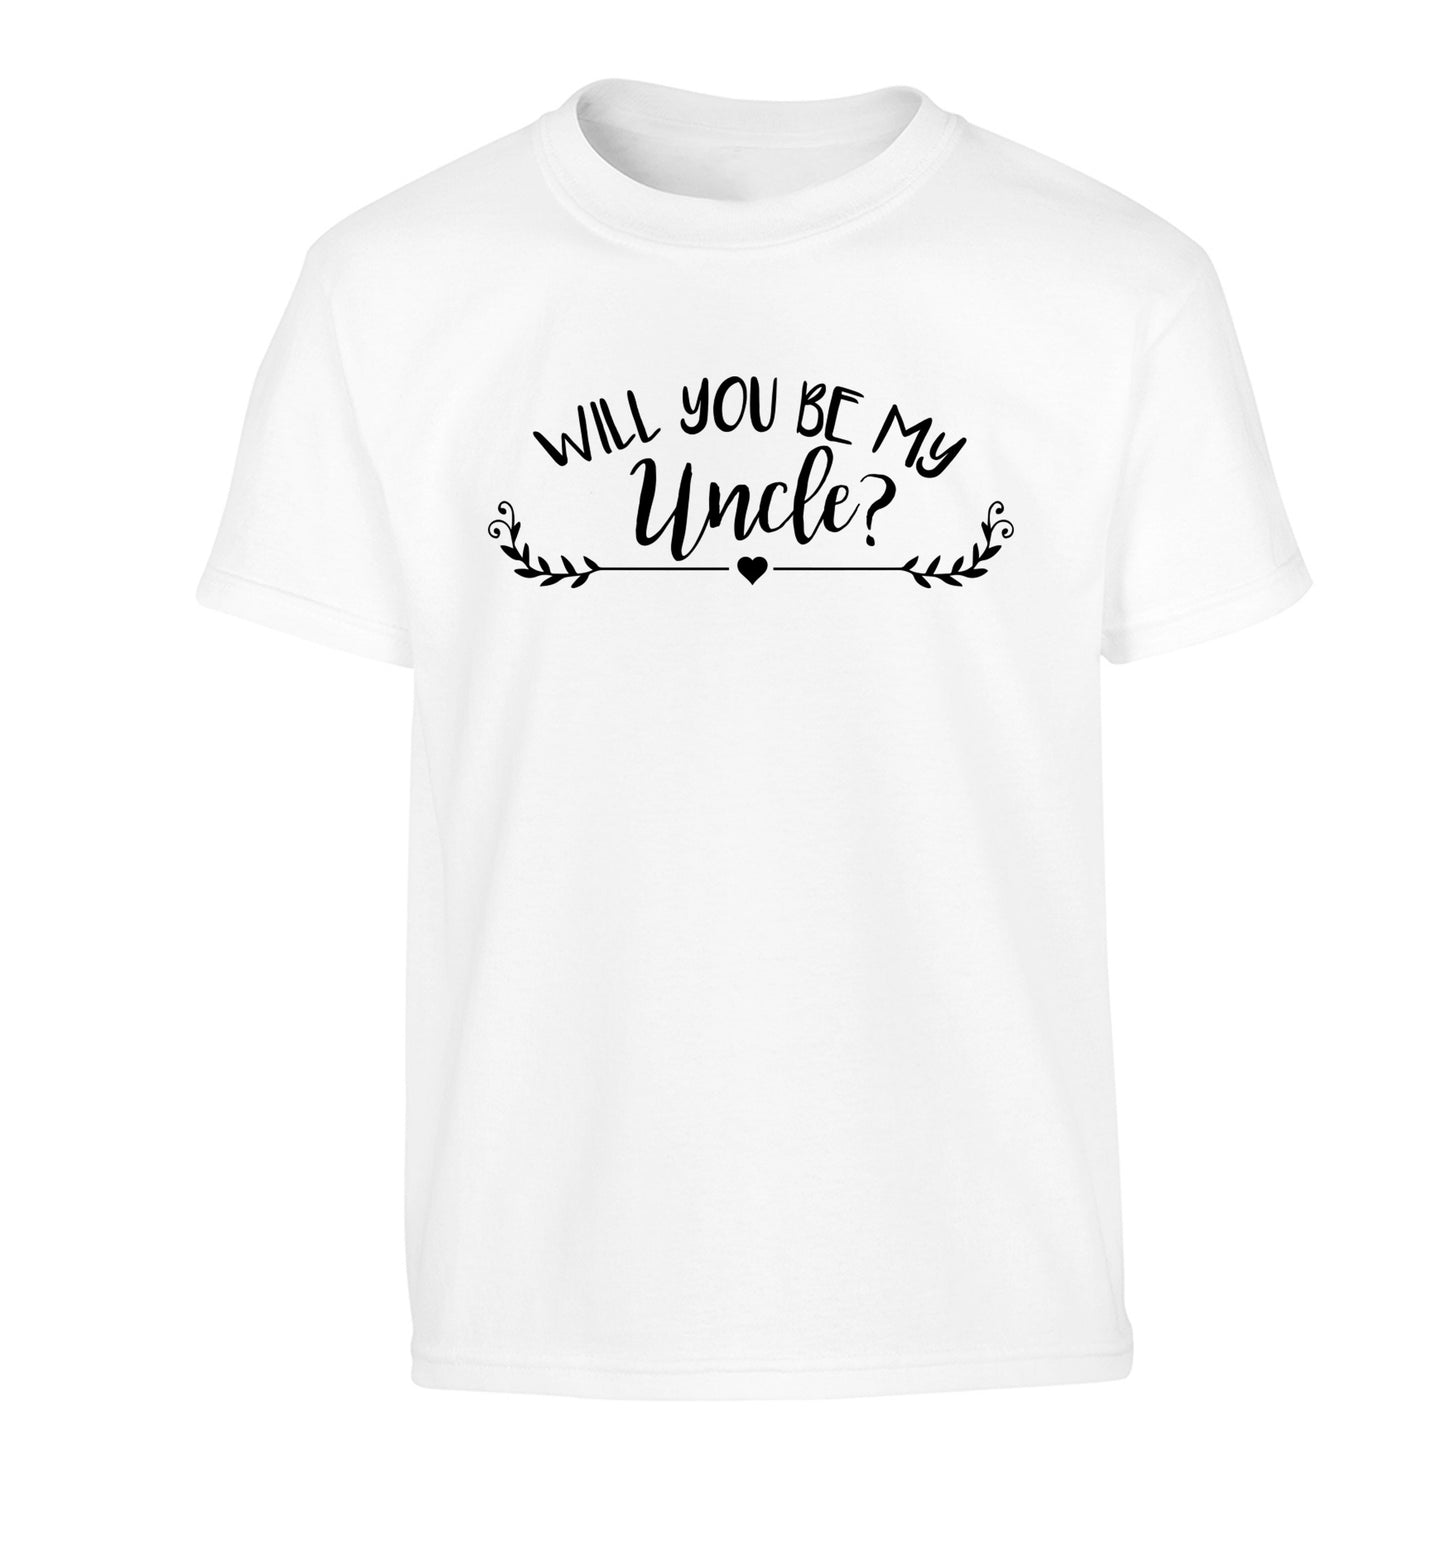 Will you be my uncle? Children's white Tshirt 12-14 Years